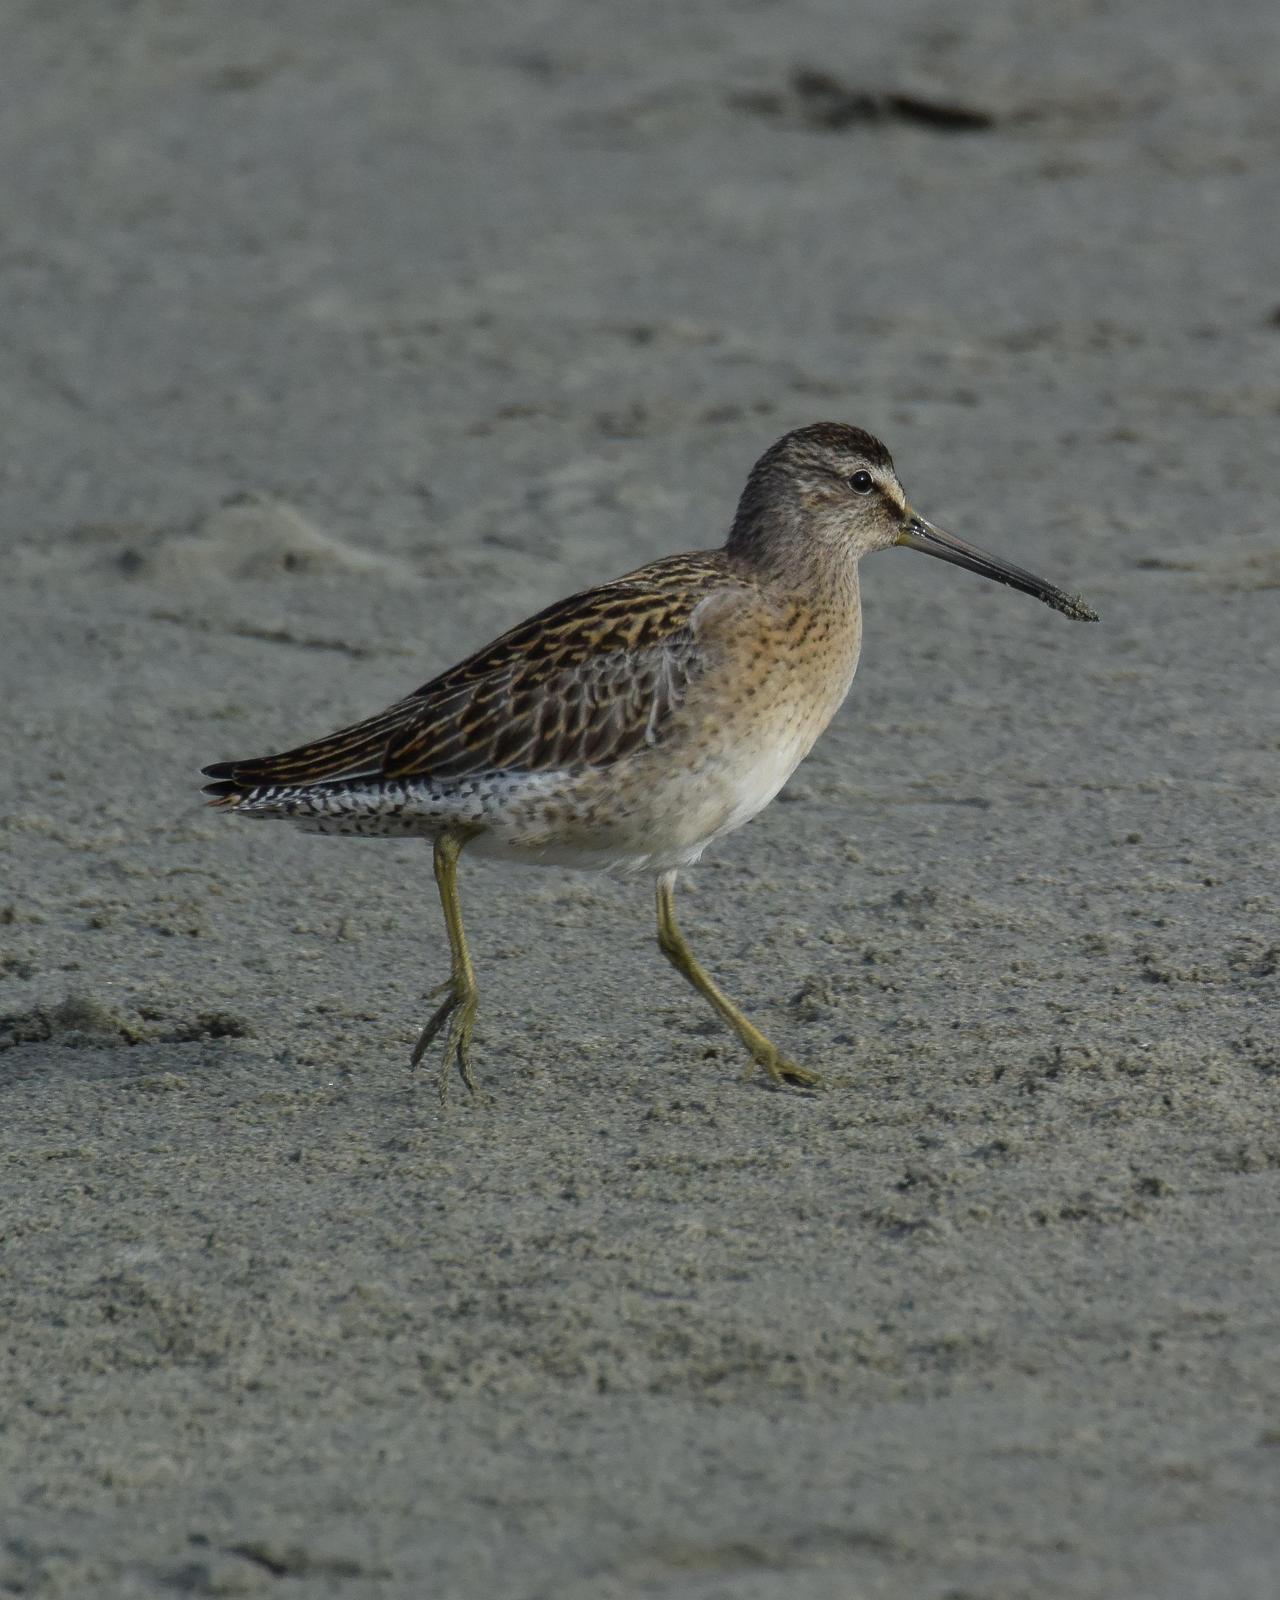 Short-billed Dowitcher Photo by Emily Percival